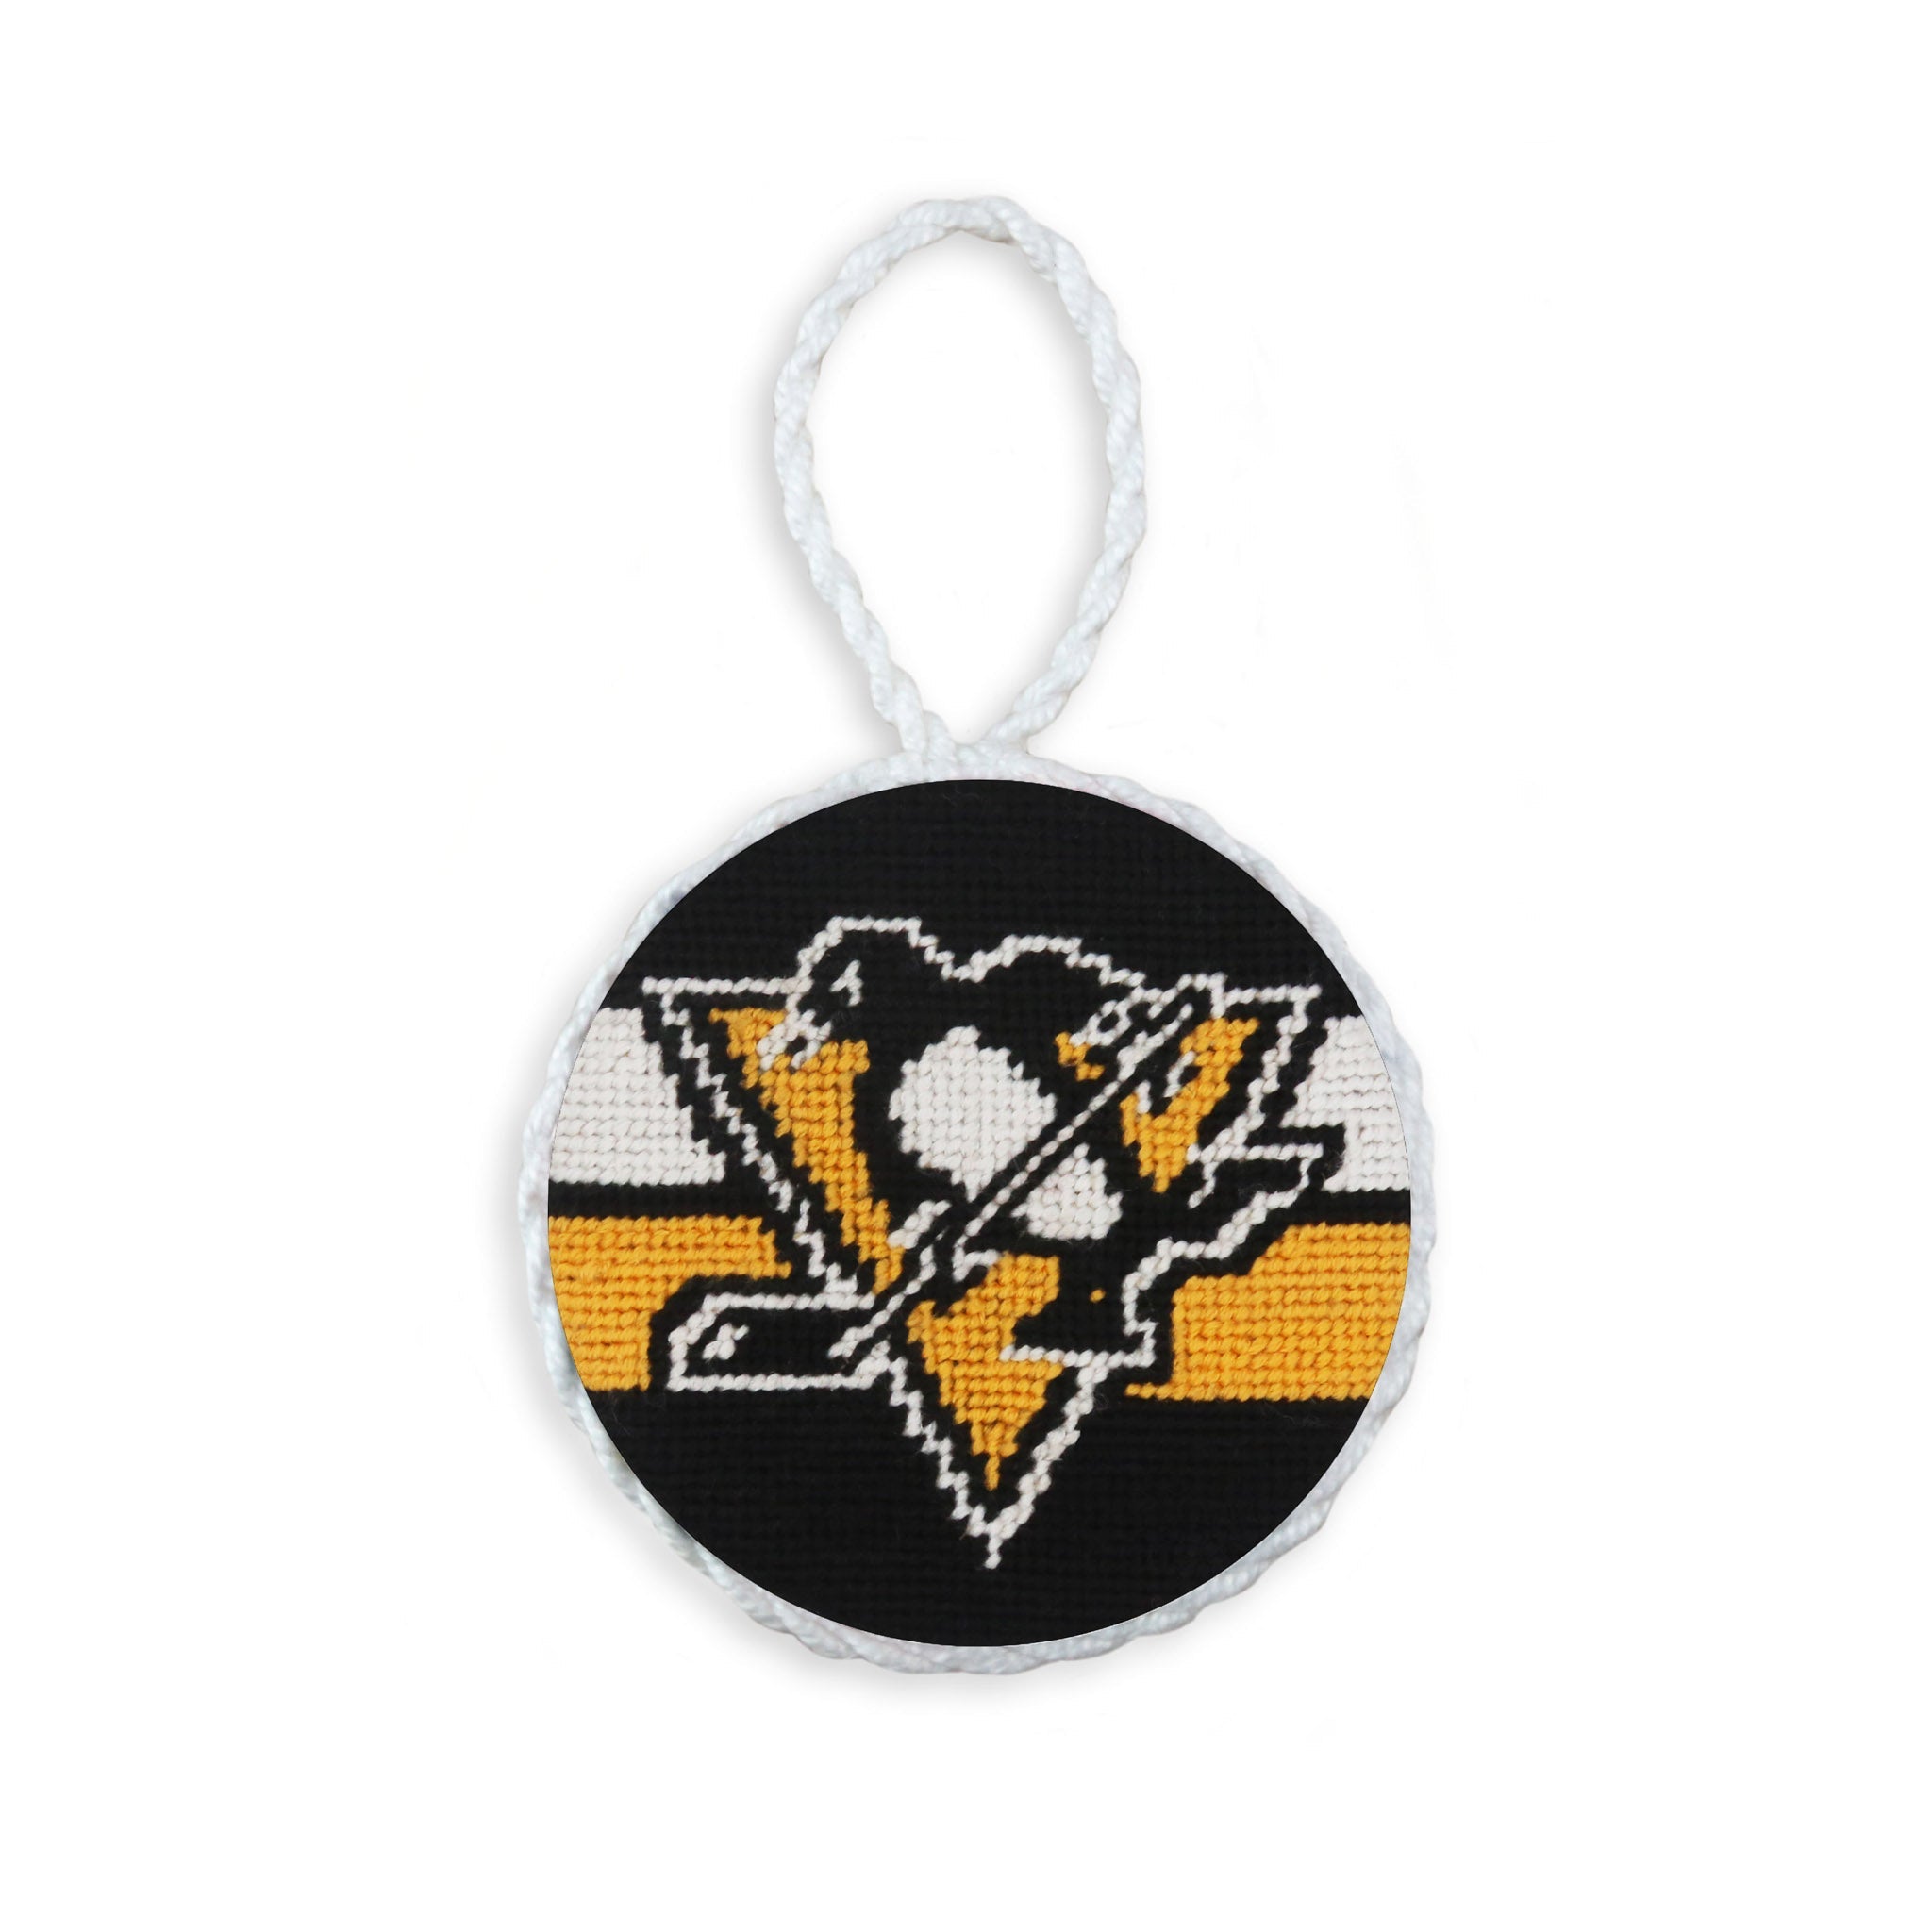 Smathers and Branson Pittsburgh Penguins Needlepoint Ornament Black - Jersey Stripes White Cord  